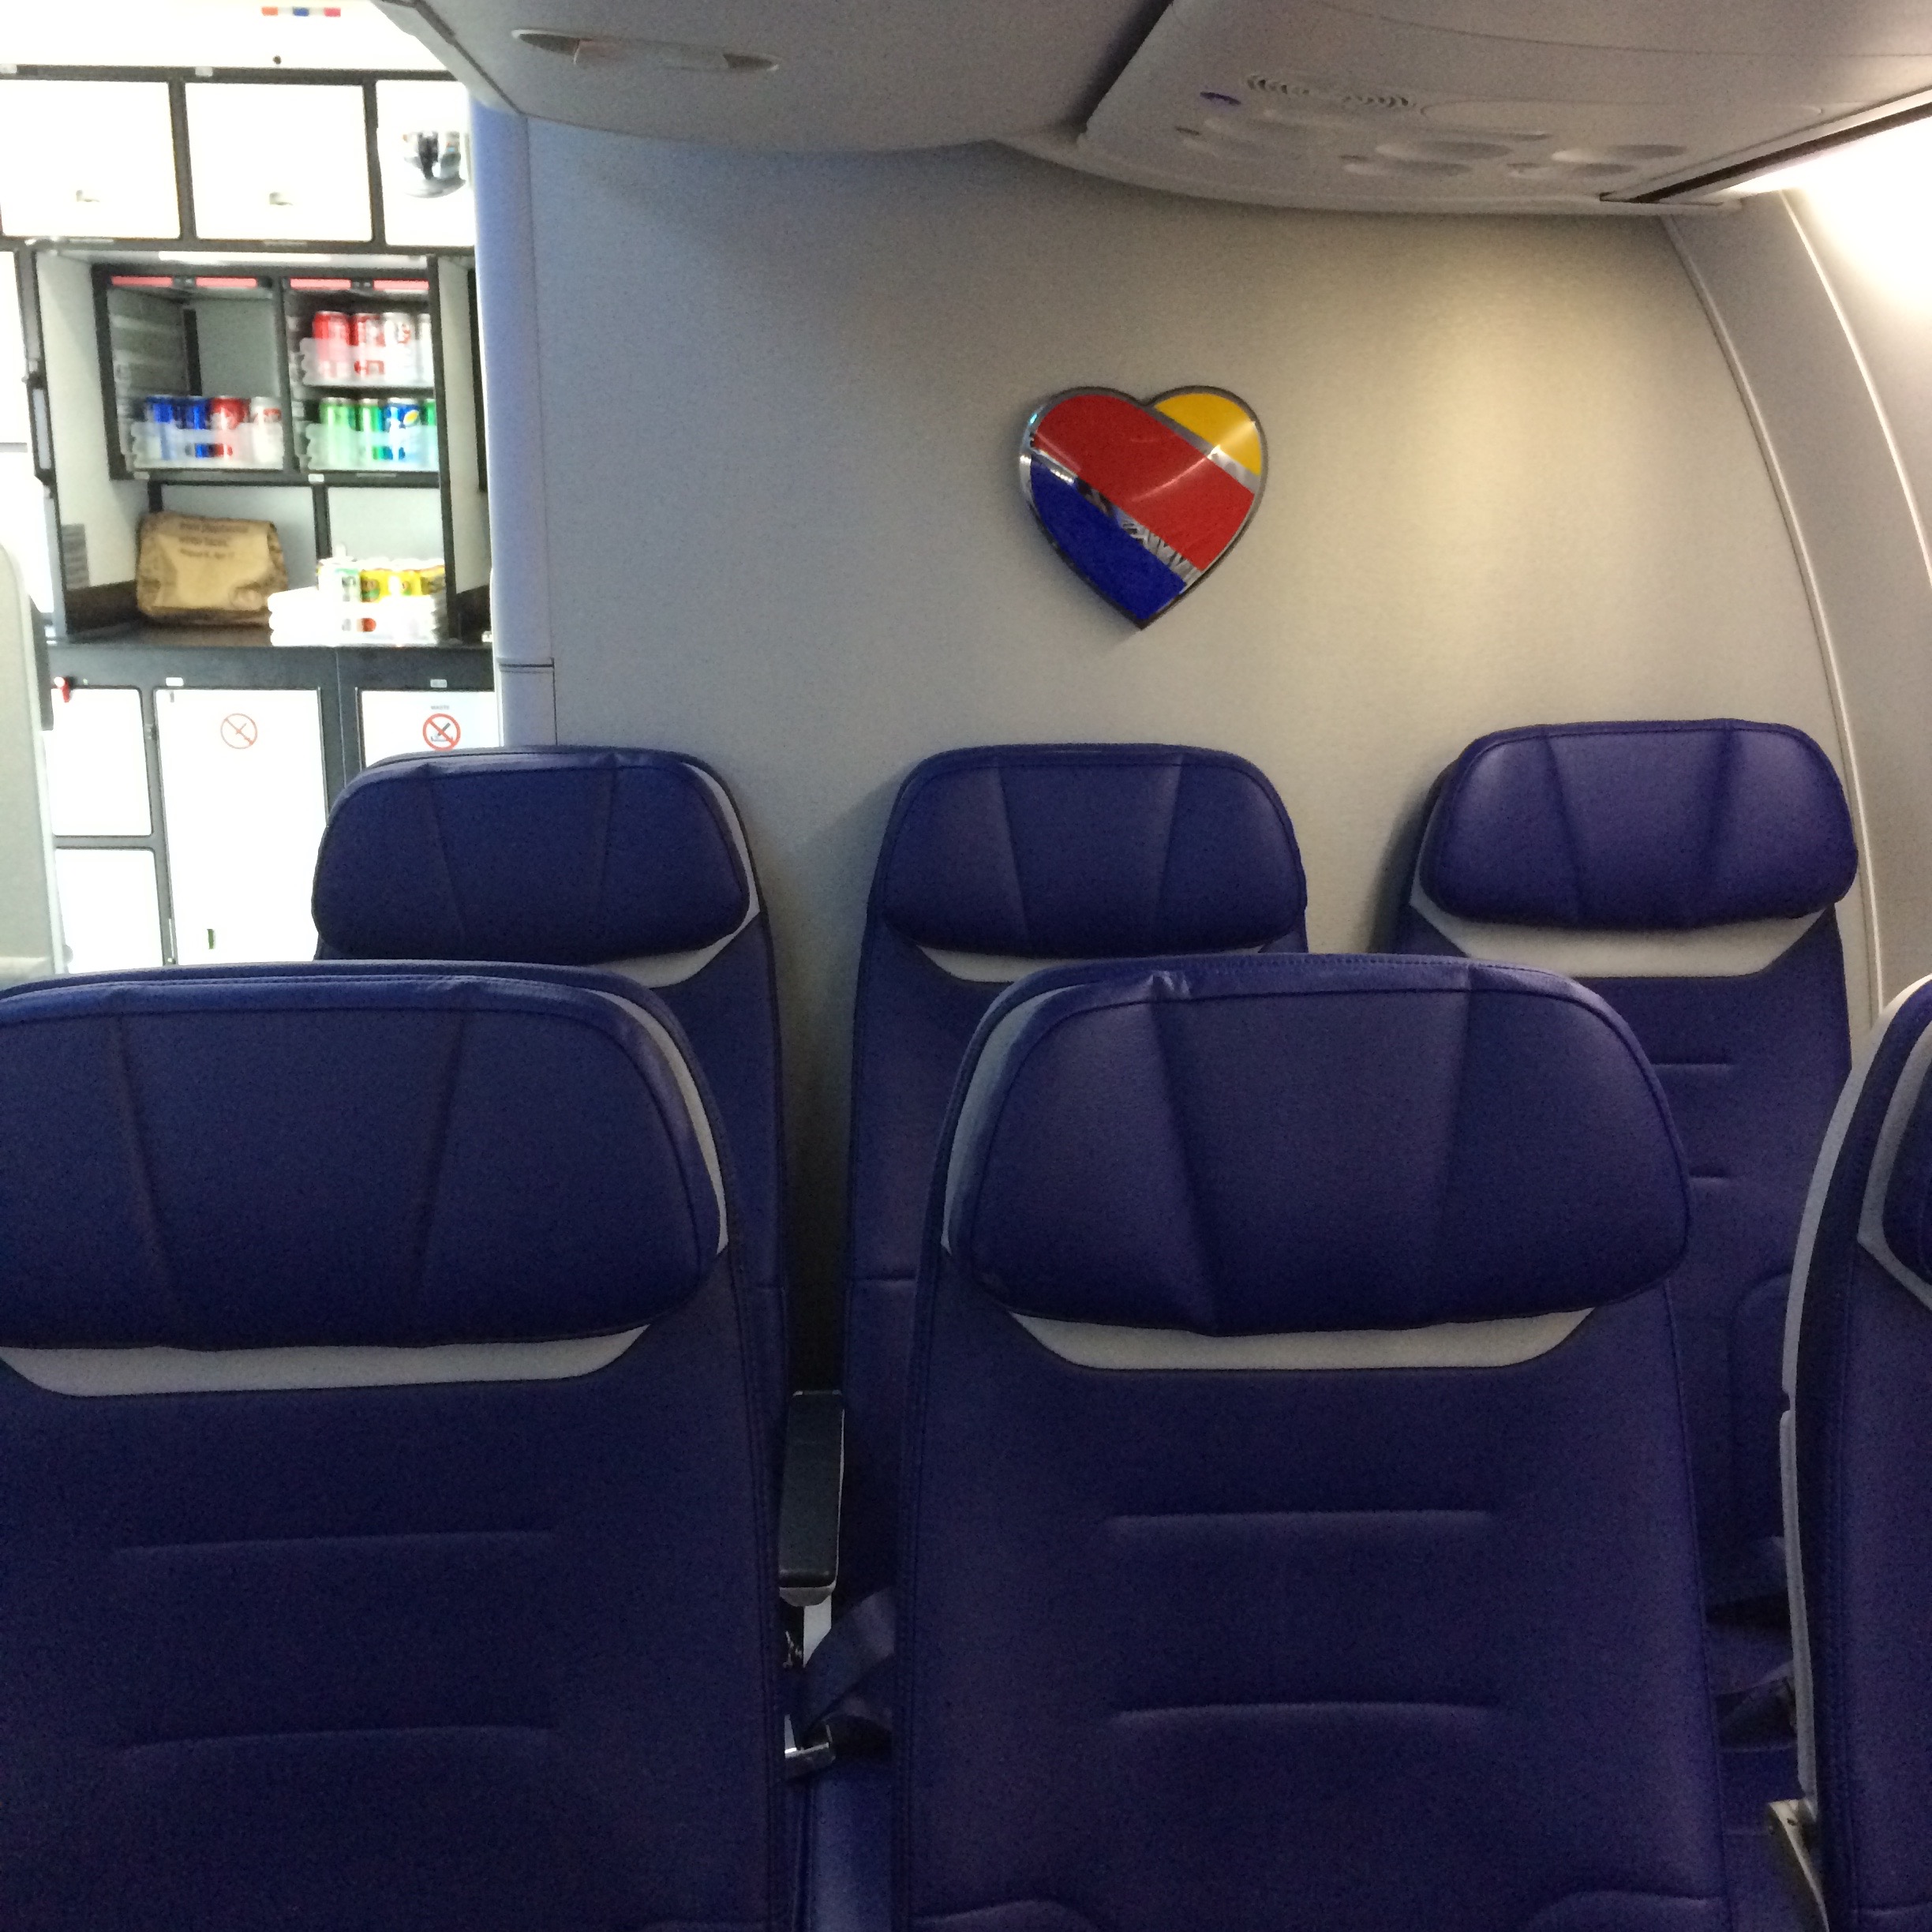 southwest airlines home office